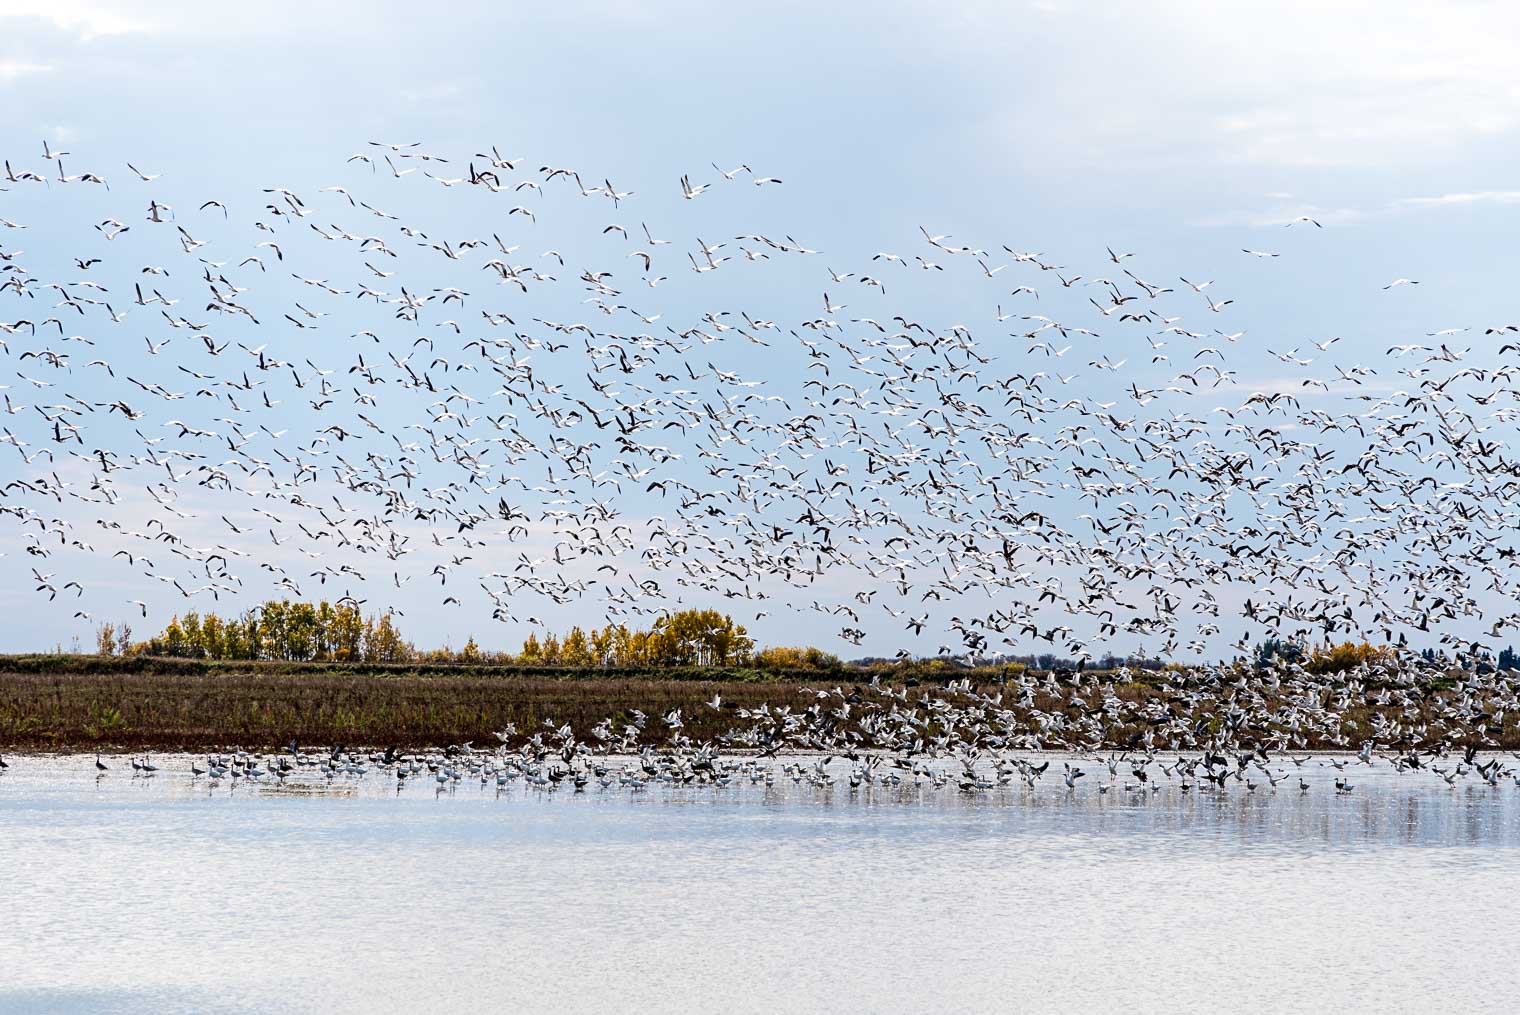 Snow Geese migration, Keeping With the Times, Barb Brookbank